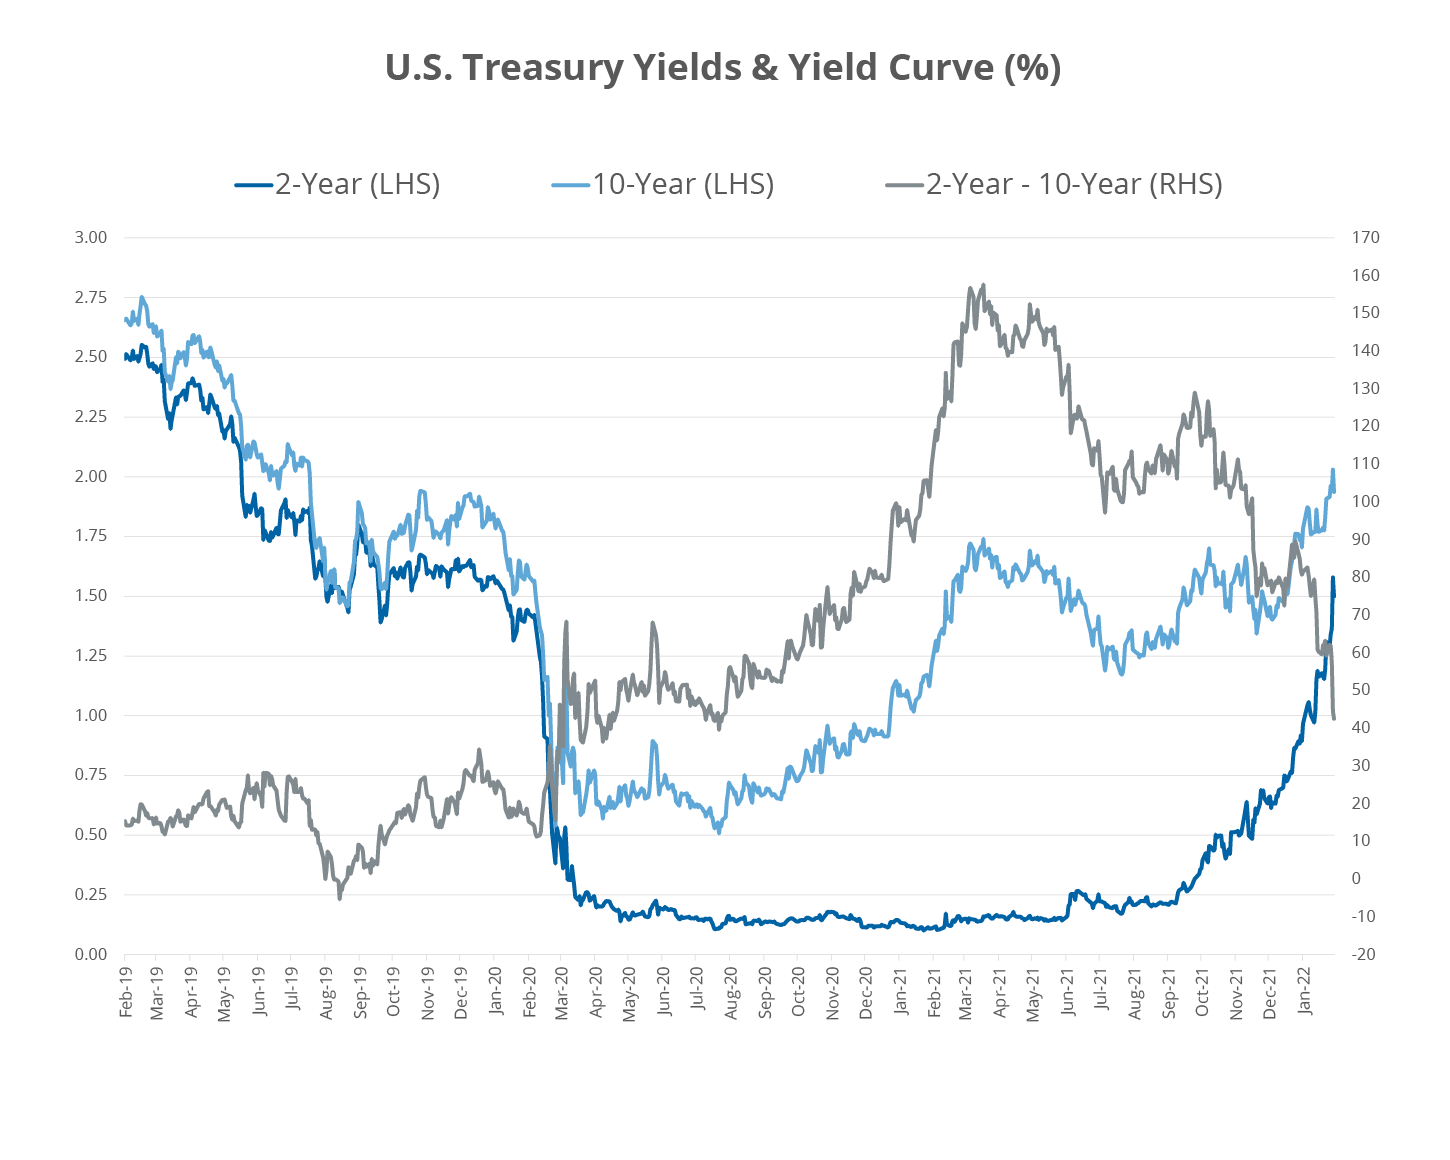 U.S. Treasury Yields (2-year, 10-year and 2s-10s rates) and Yield Curve as a percent: Short-term Interest Rates